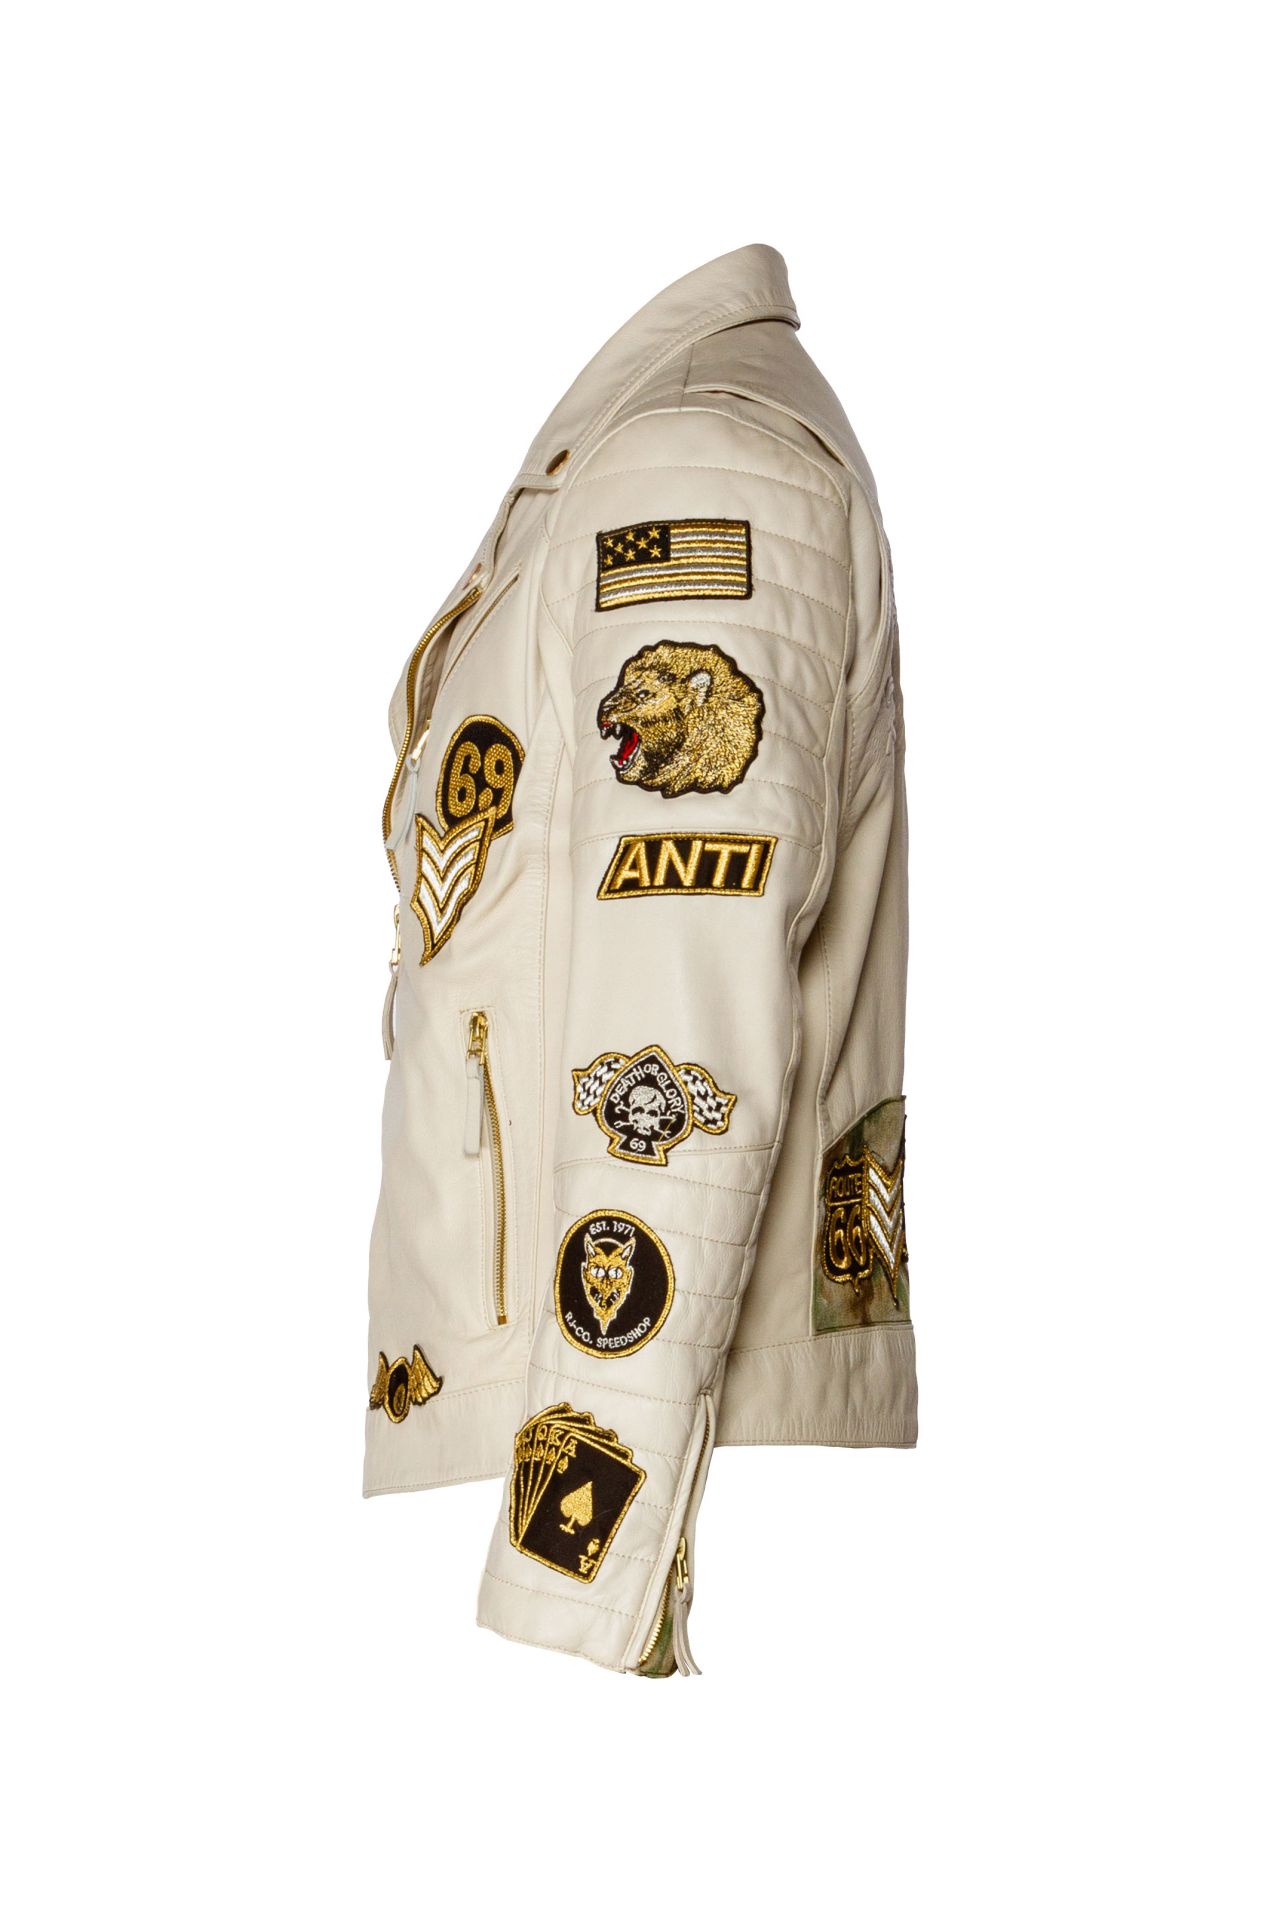 WHITE LEATHER BIKER JACKET WITH PATCHWORK